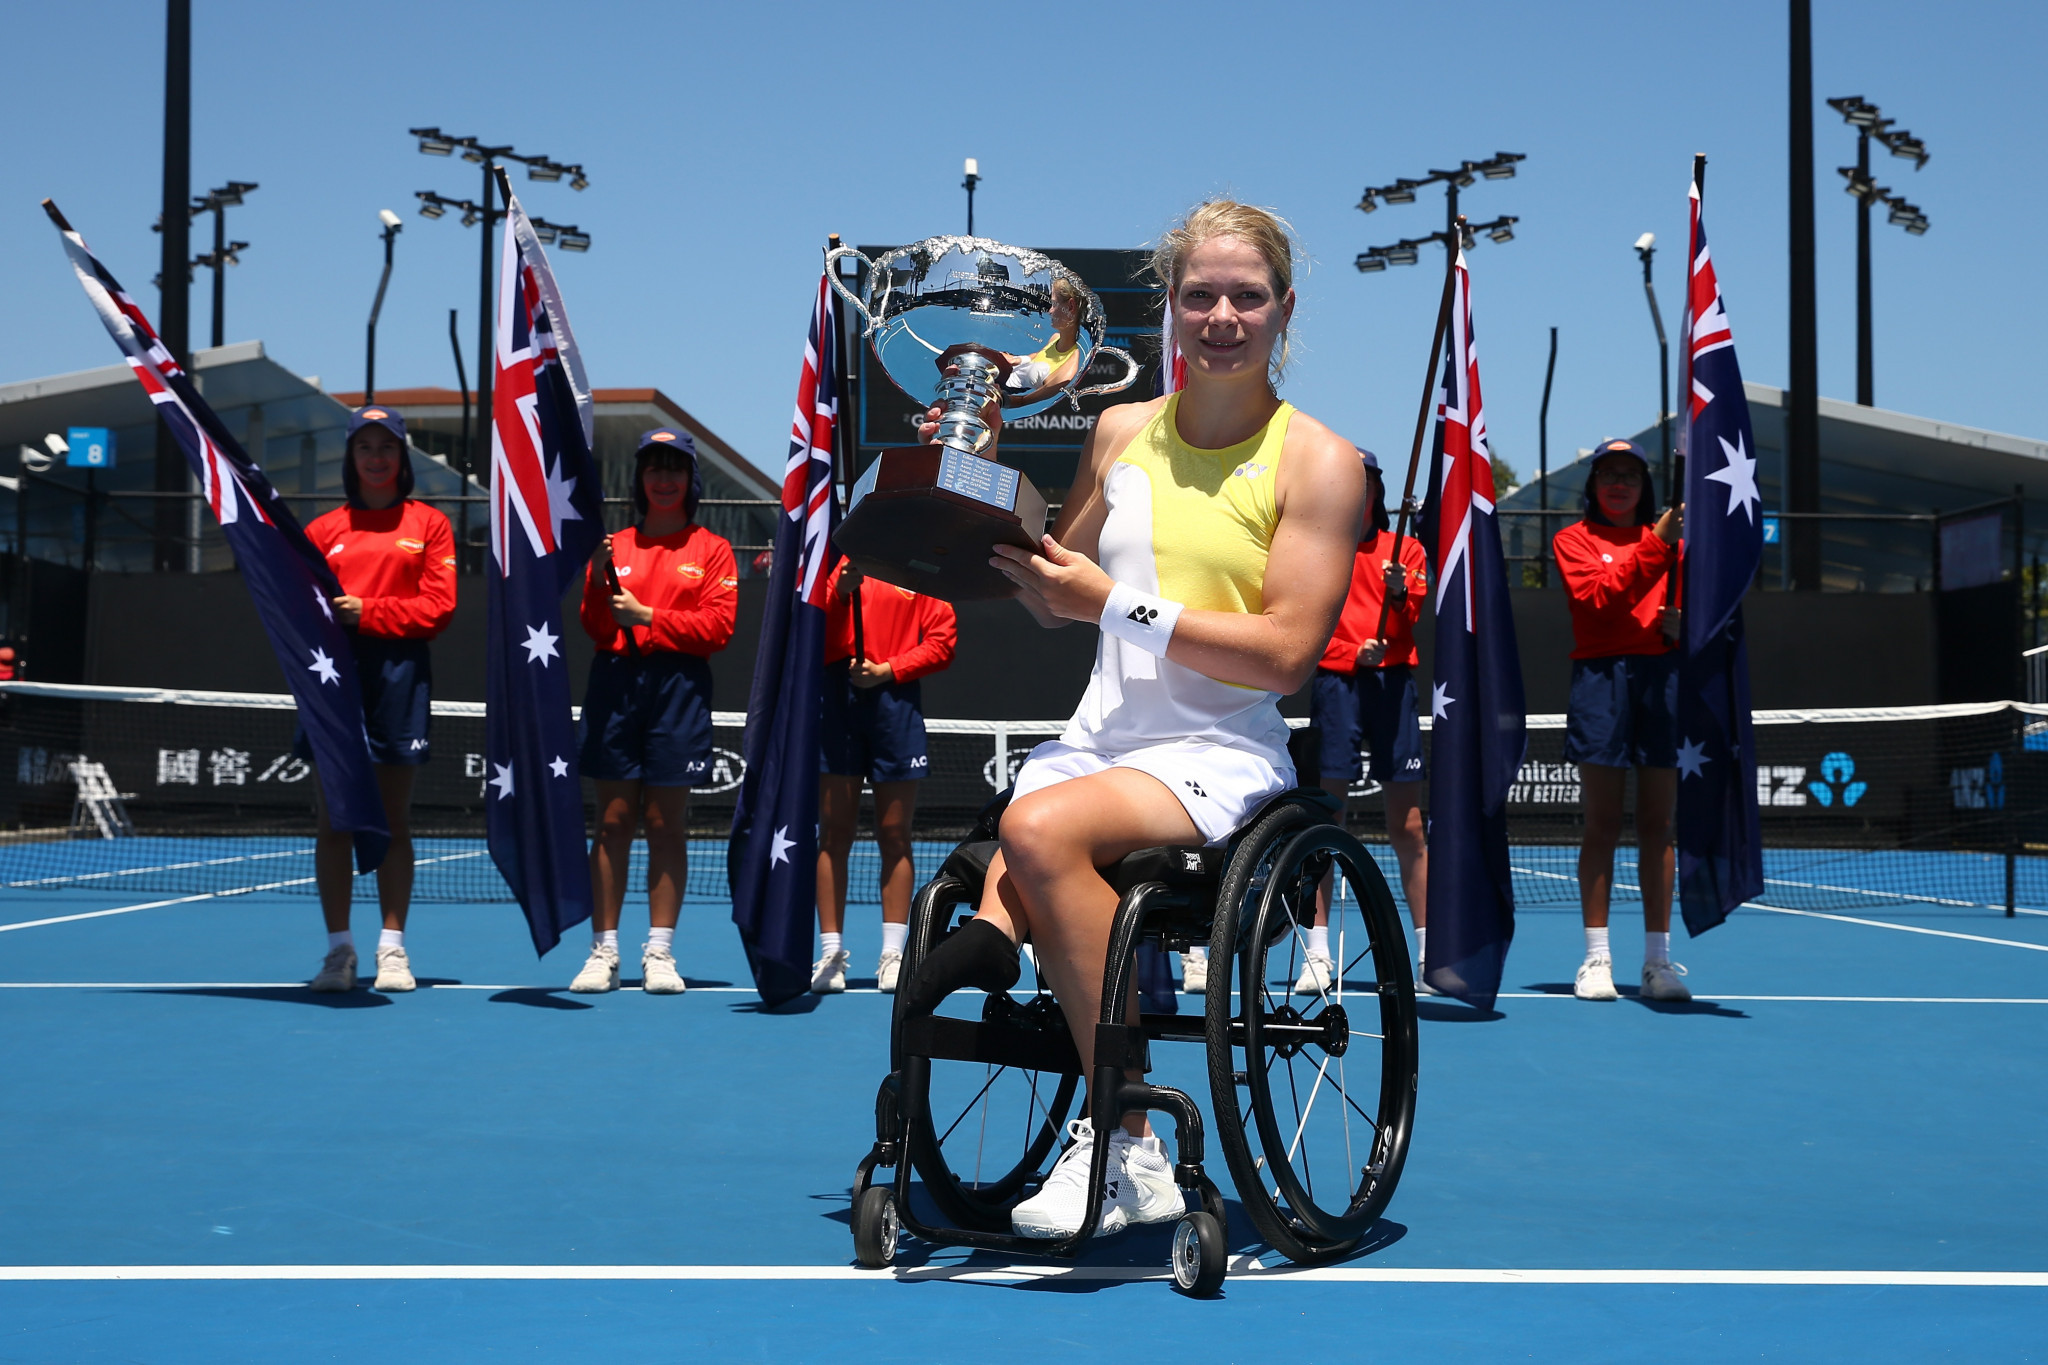 De Groot continues dominance of women's wheelchair tennis with singles and doubles victories at Australian Open